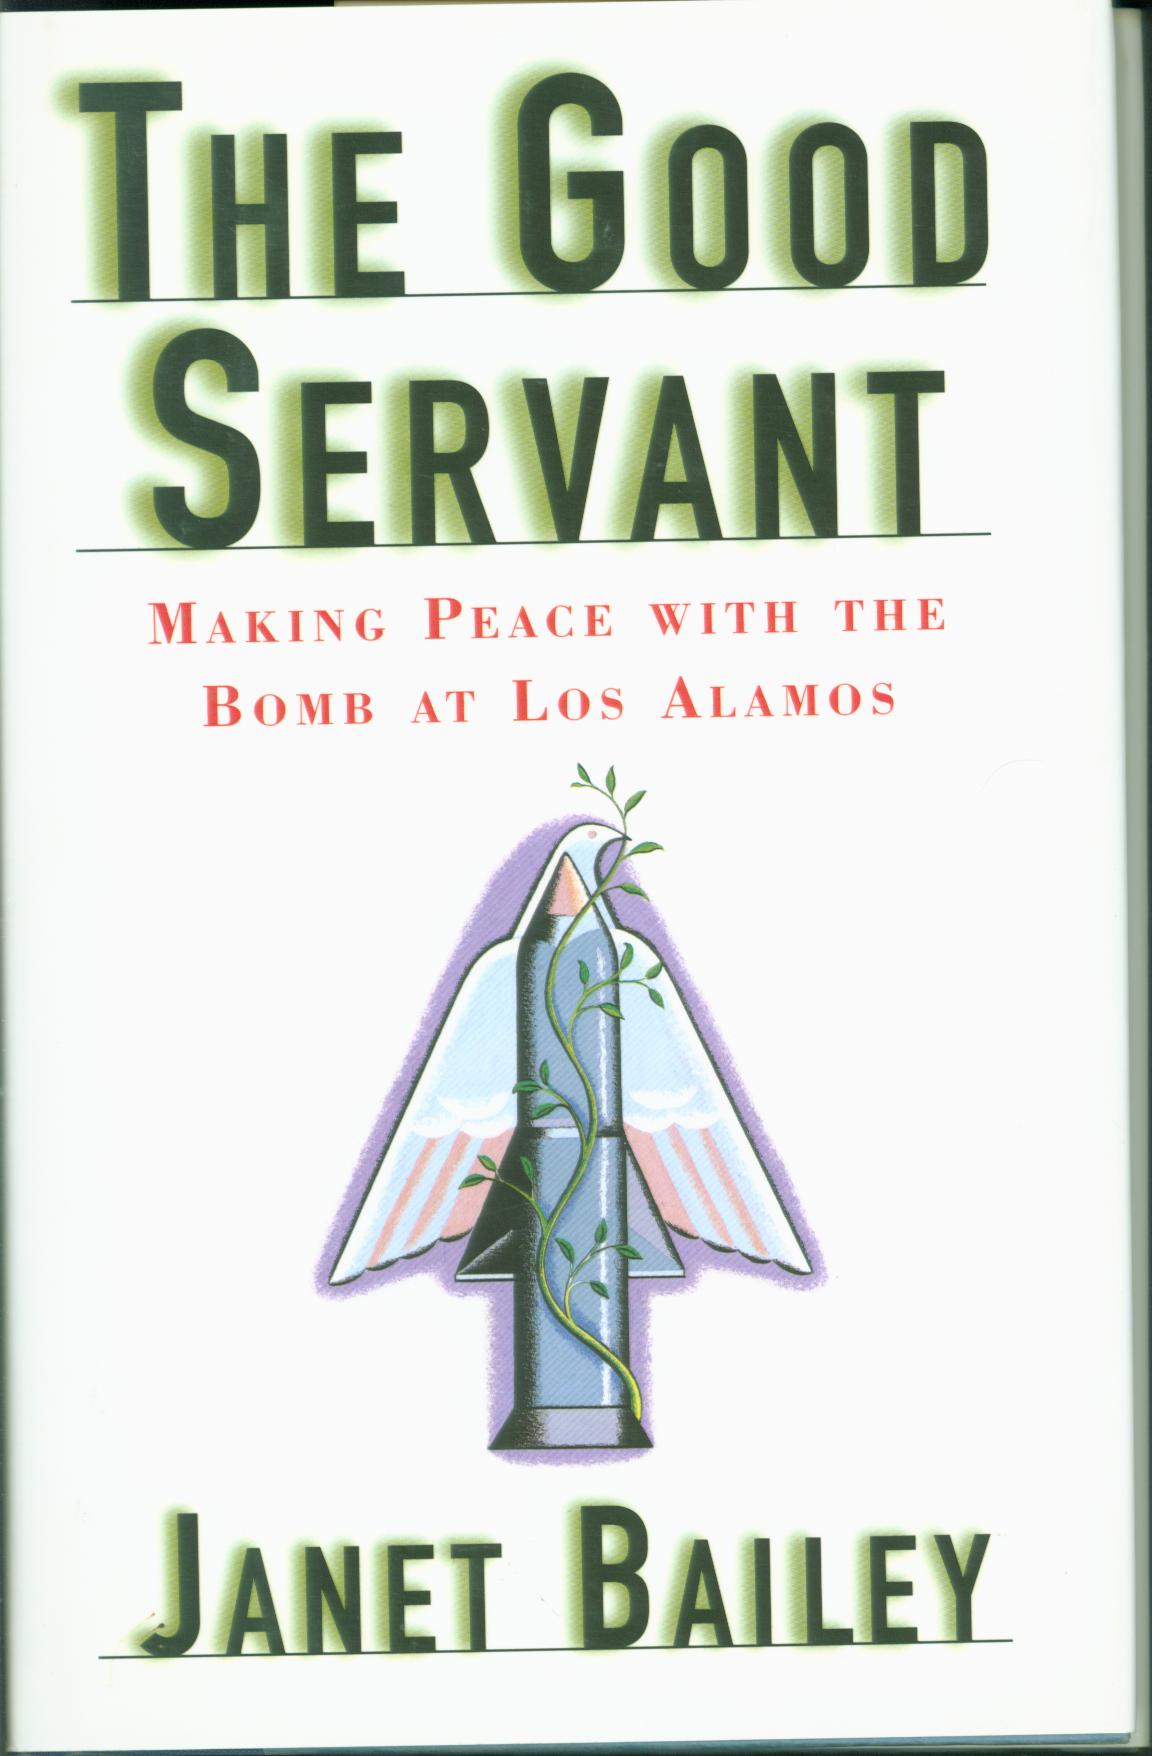 THE GOOD SERVANT: making peace with the Bomb at Los Alamos. 